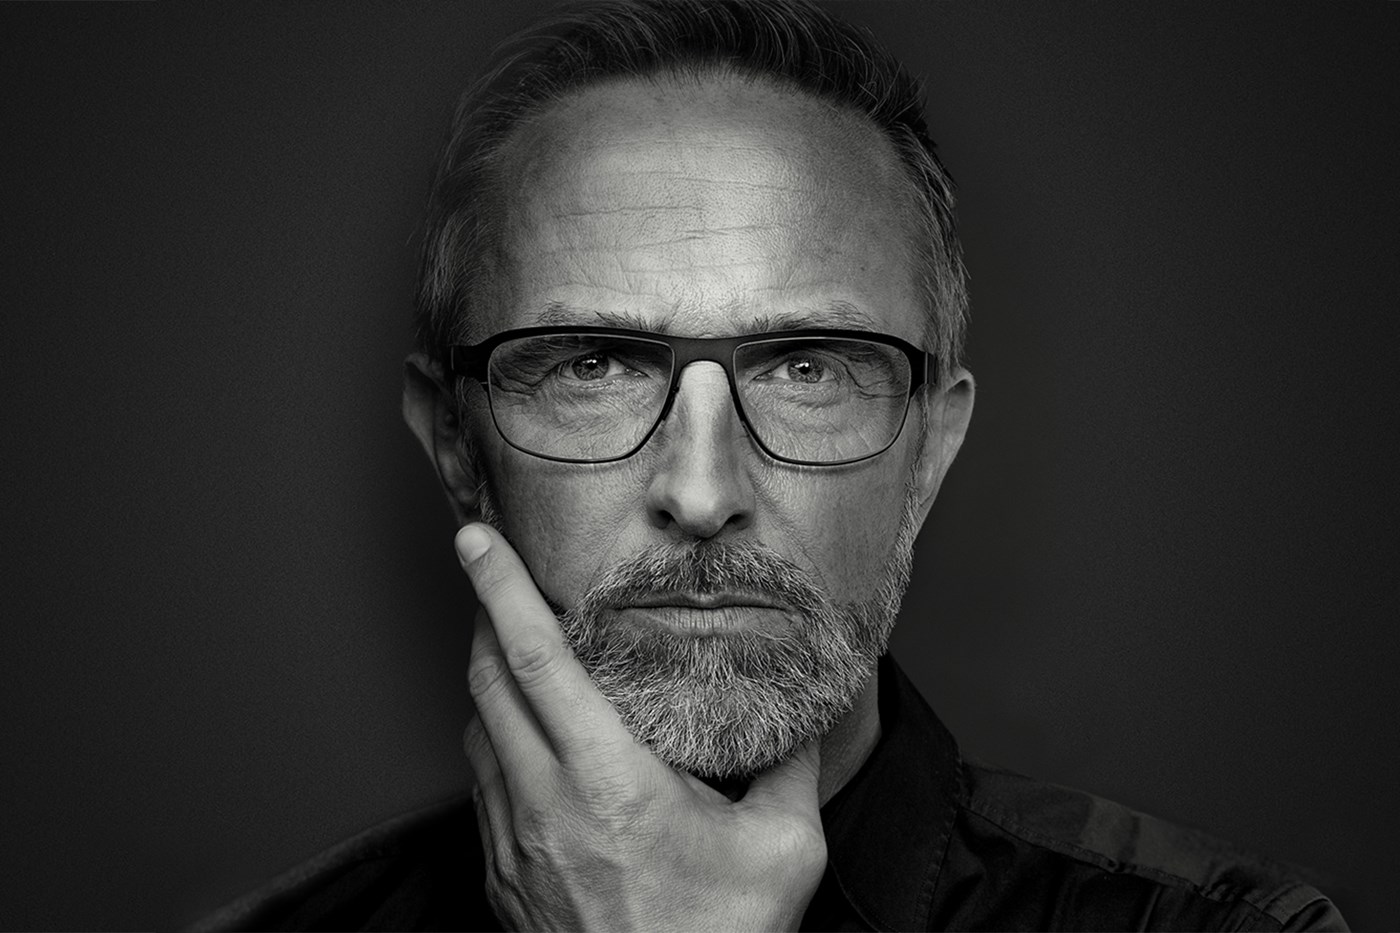 Black and white image of a male wearing eyeglasses looking away from the camera